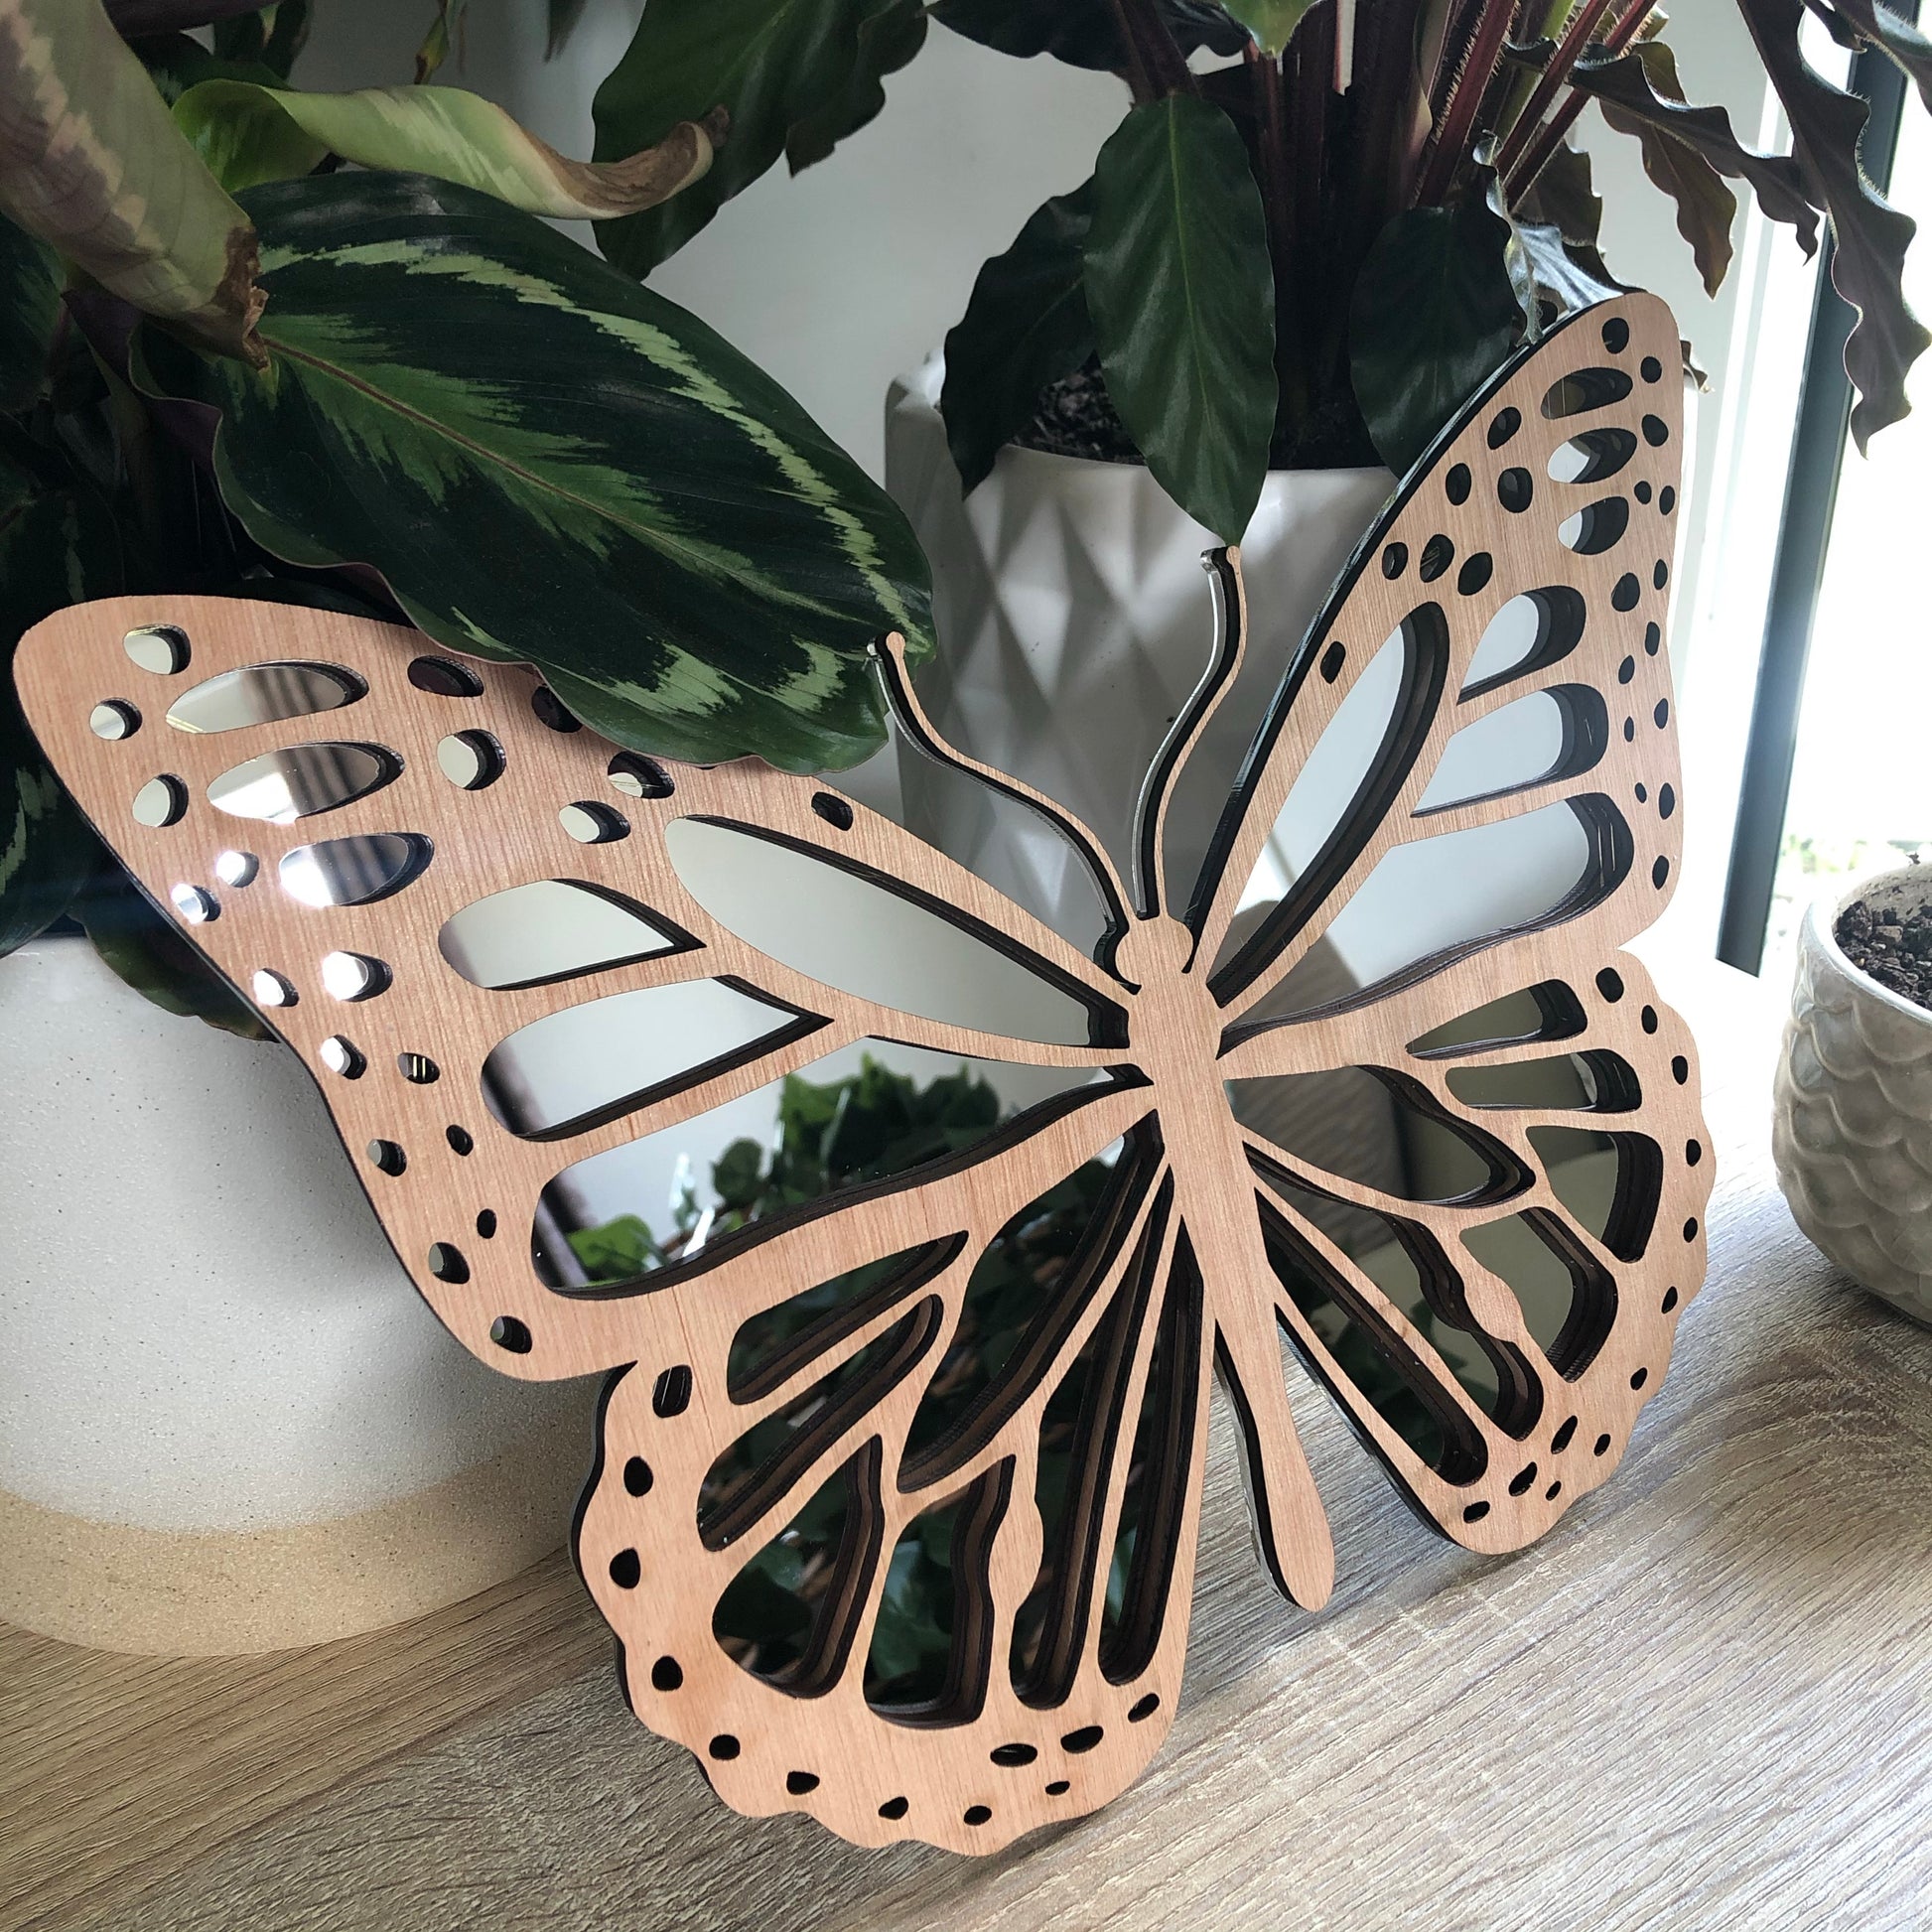 Butterfly mirror decor - Younique Collective